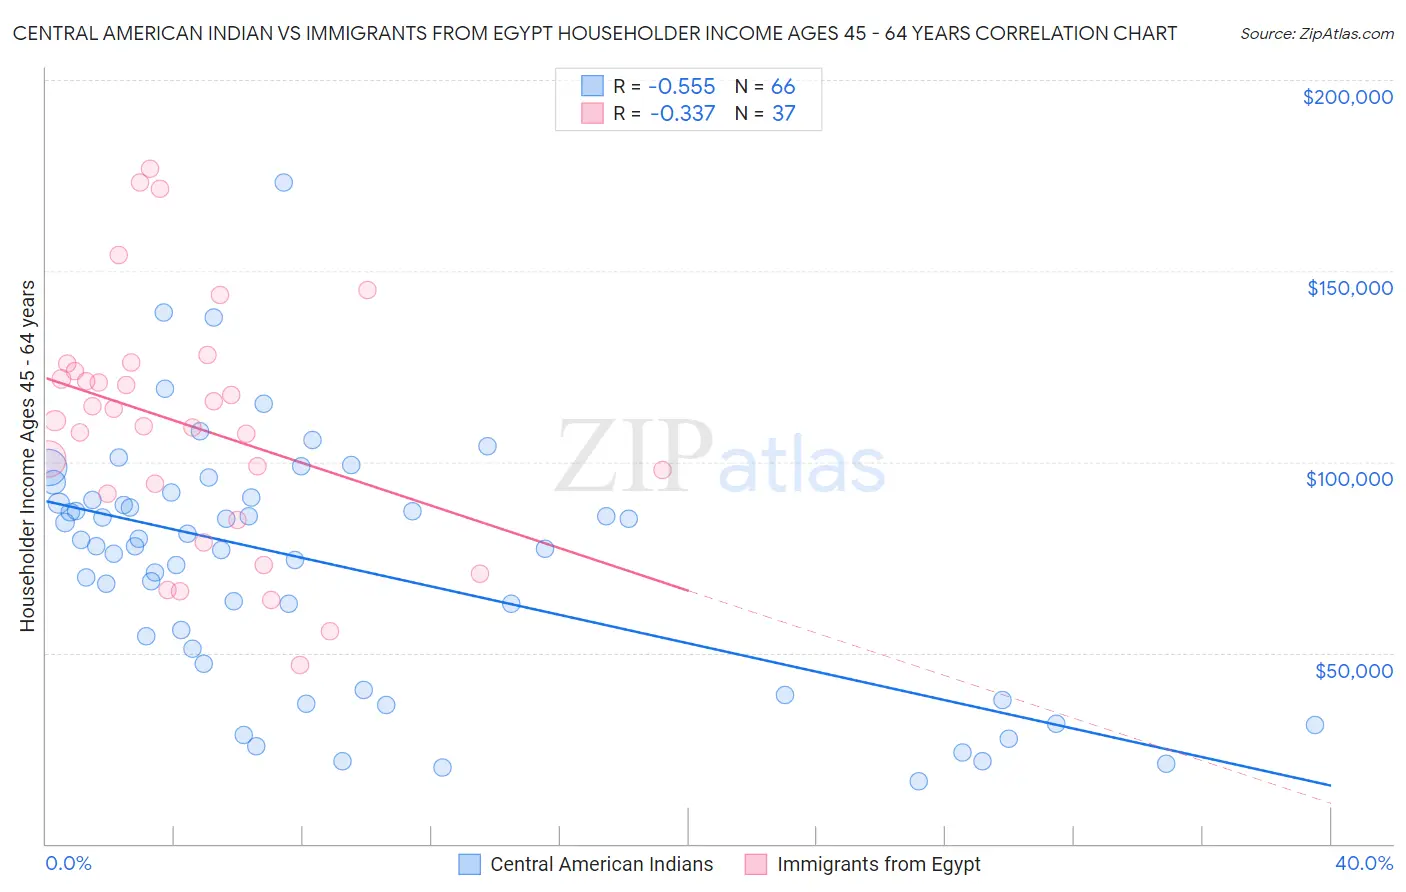 Central American Indian vs Immigrants from Egypt Householder Income Ages 45 - 64 years